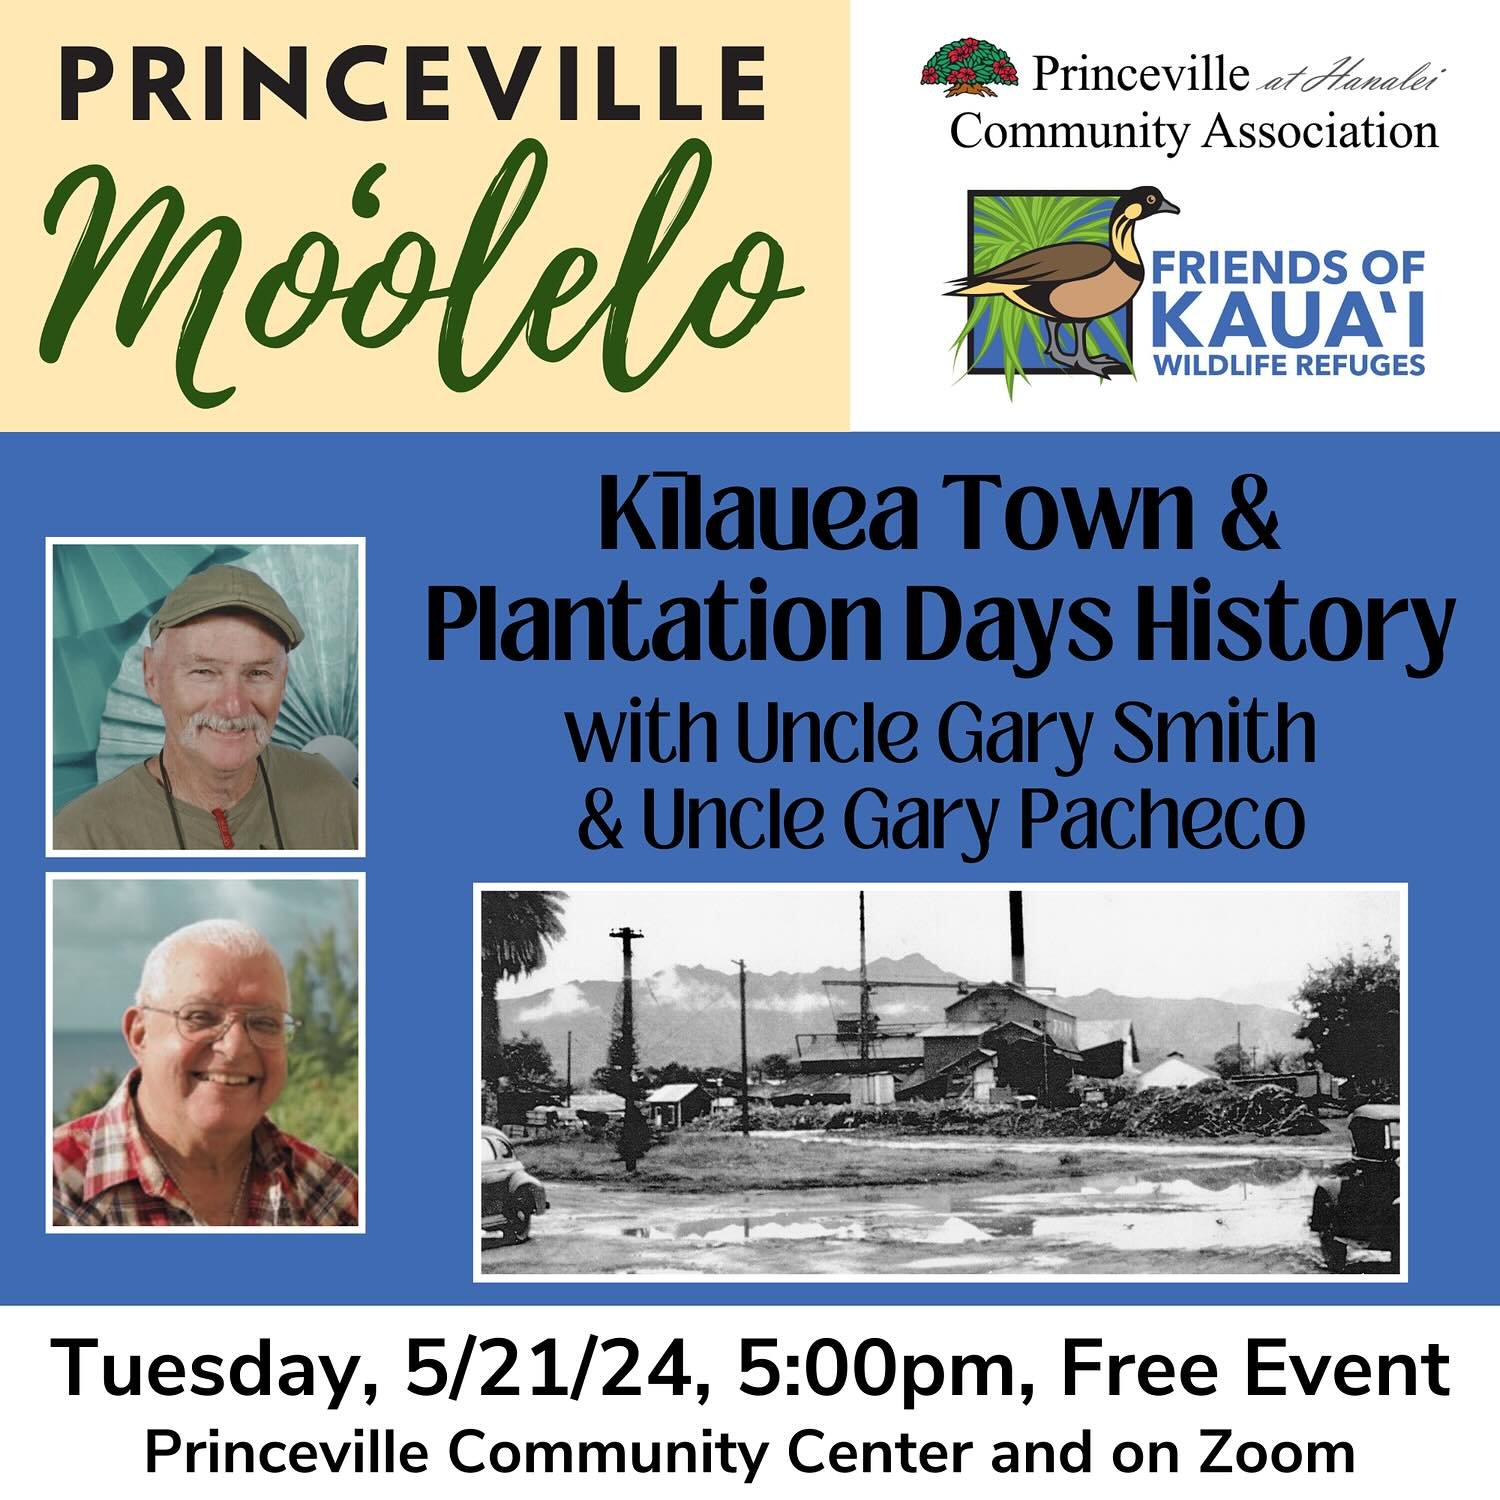 Our Princeville Moʻolelo free lecture series will continue on Tuesday, May 21, 2024 at 5pm with a special presentation by two beloved local historians. Join us as Uncle Gary Smith and Uncle Gary Pacheco talk story about their Kīlauea Plantation Days 